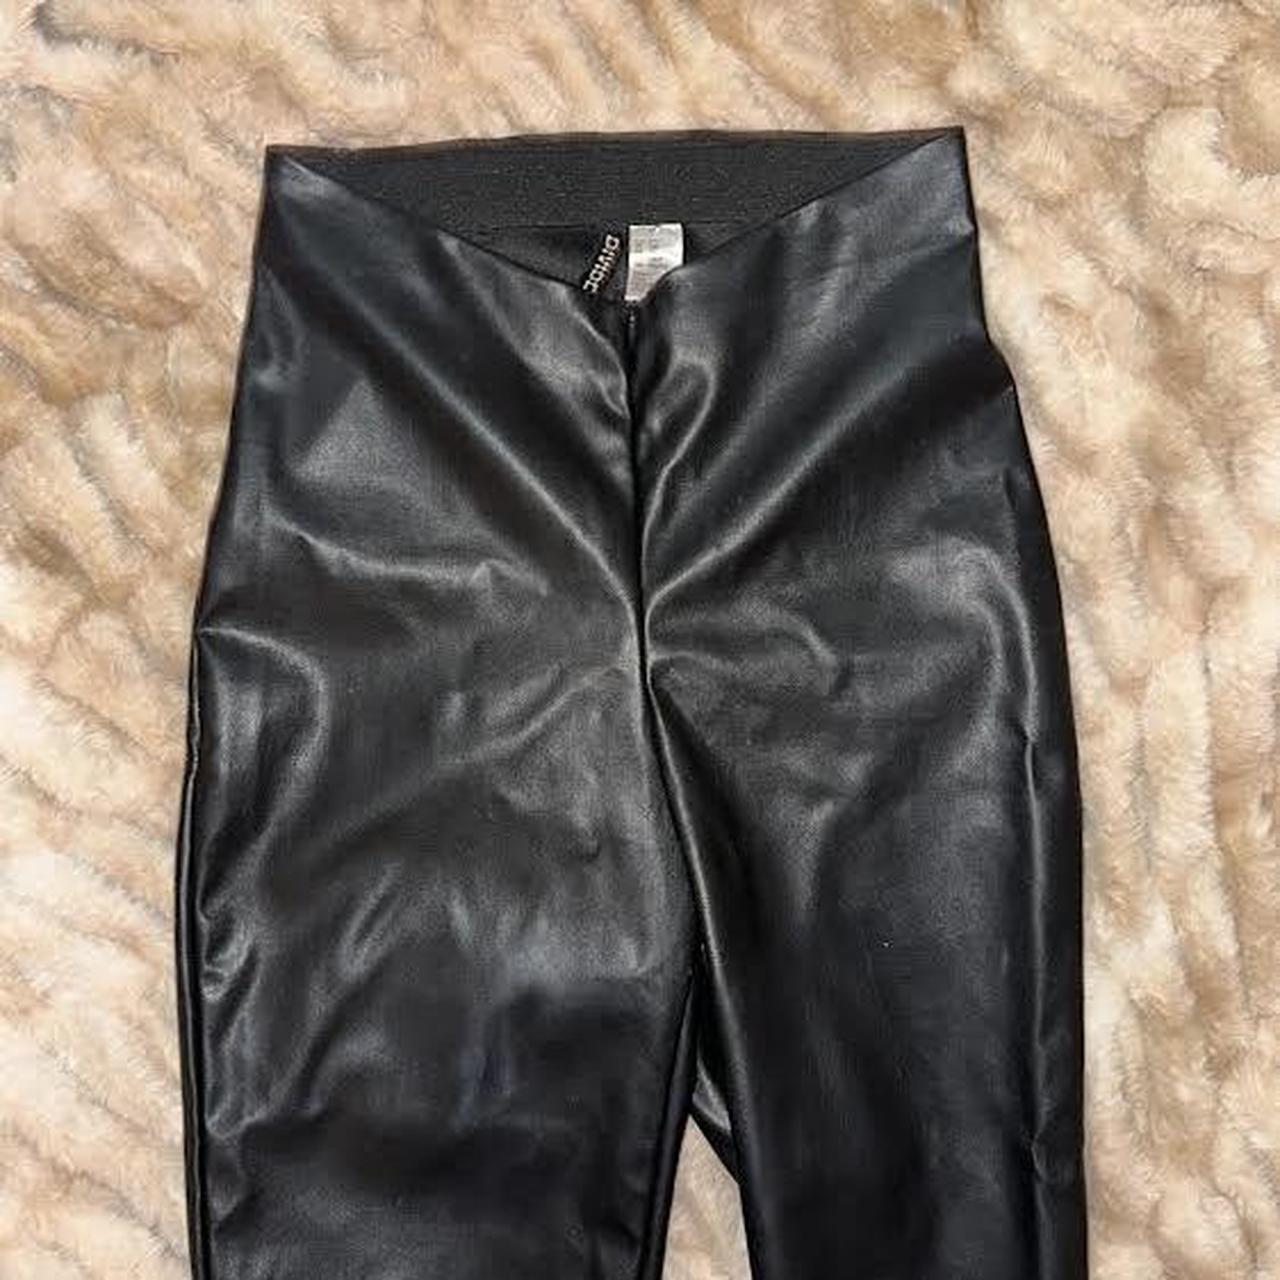 Leather Pants - $5 ship!! These are flares, very... - Depop